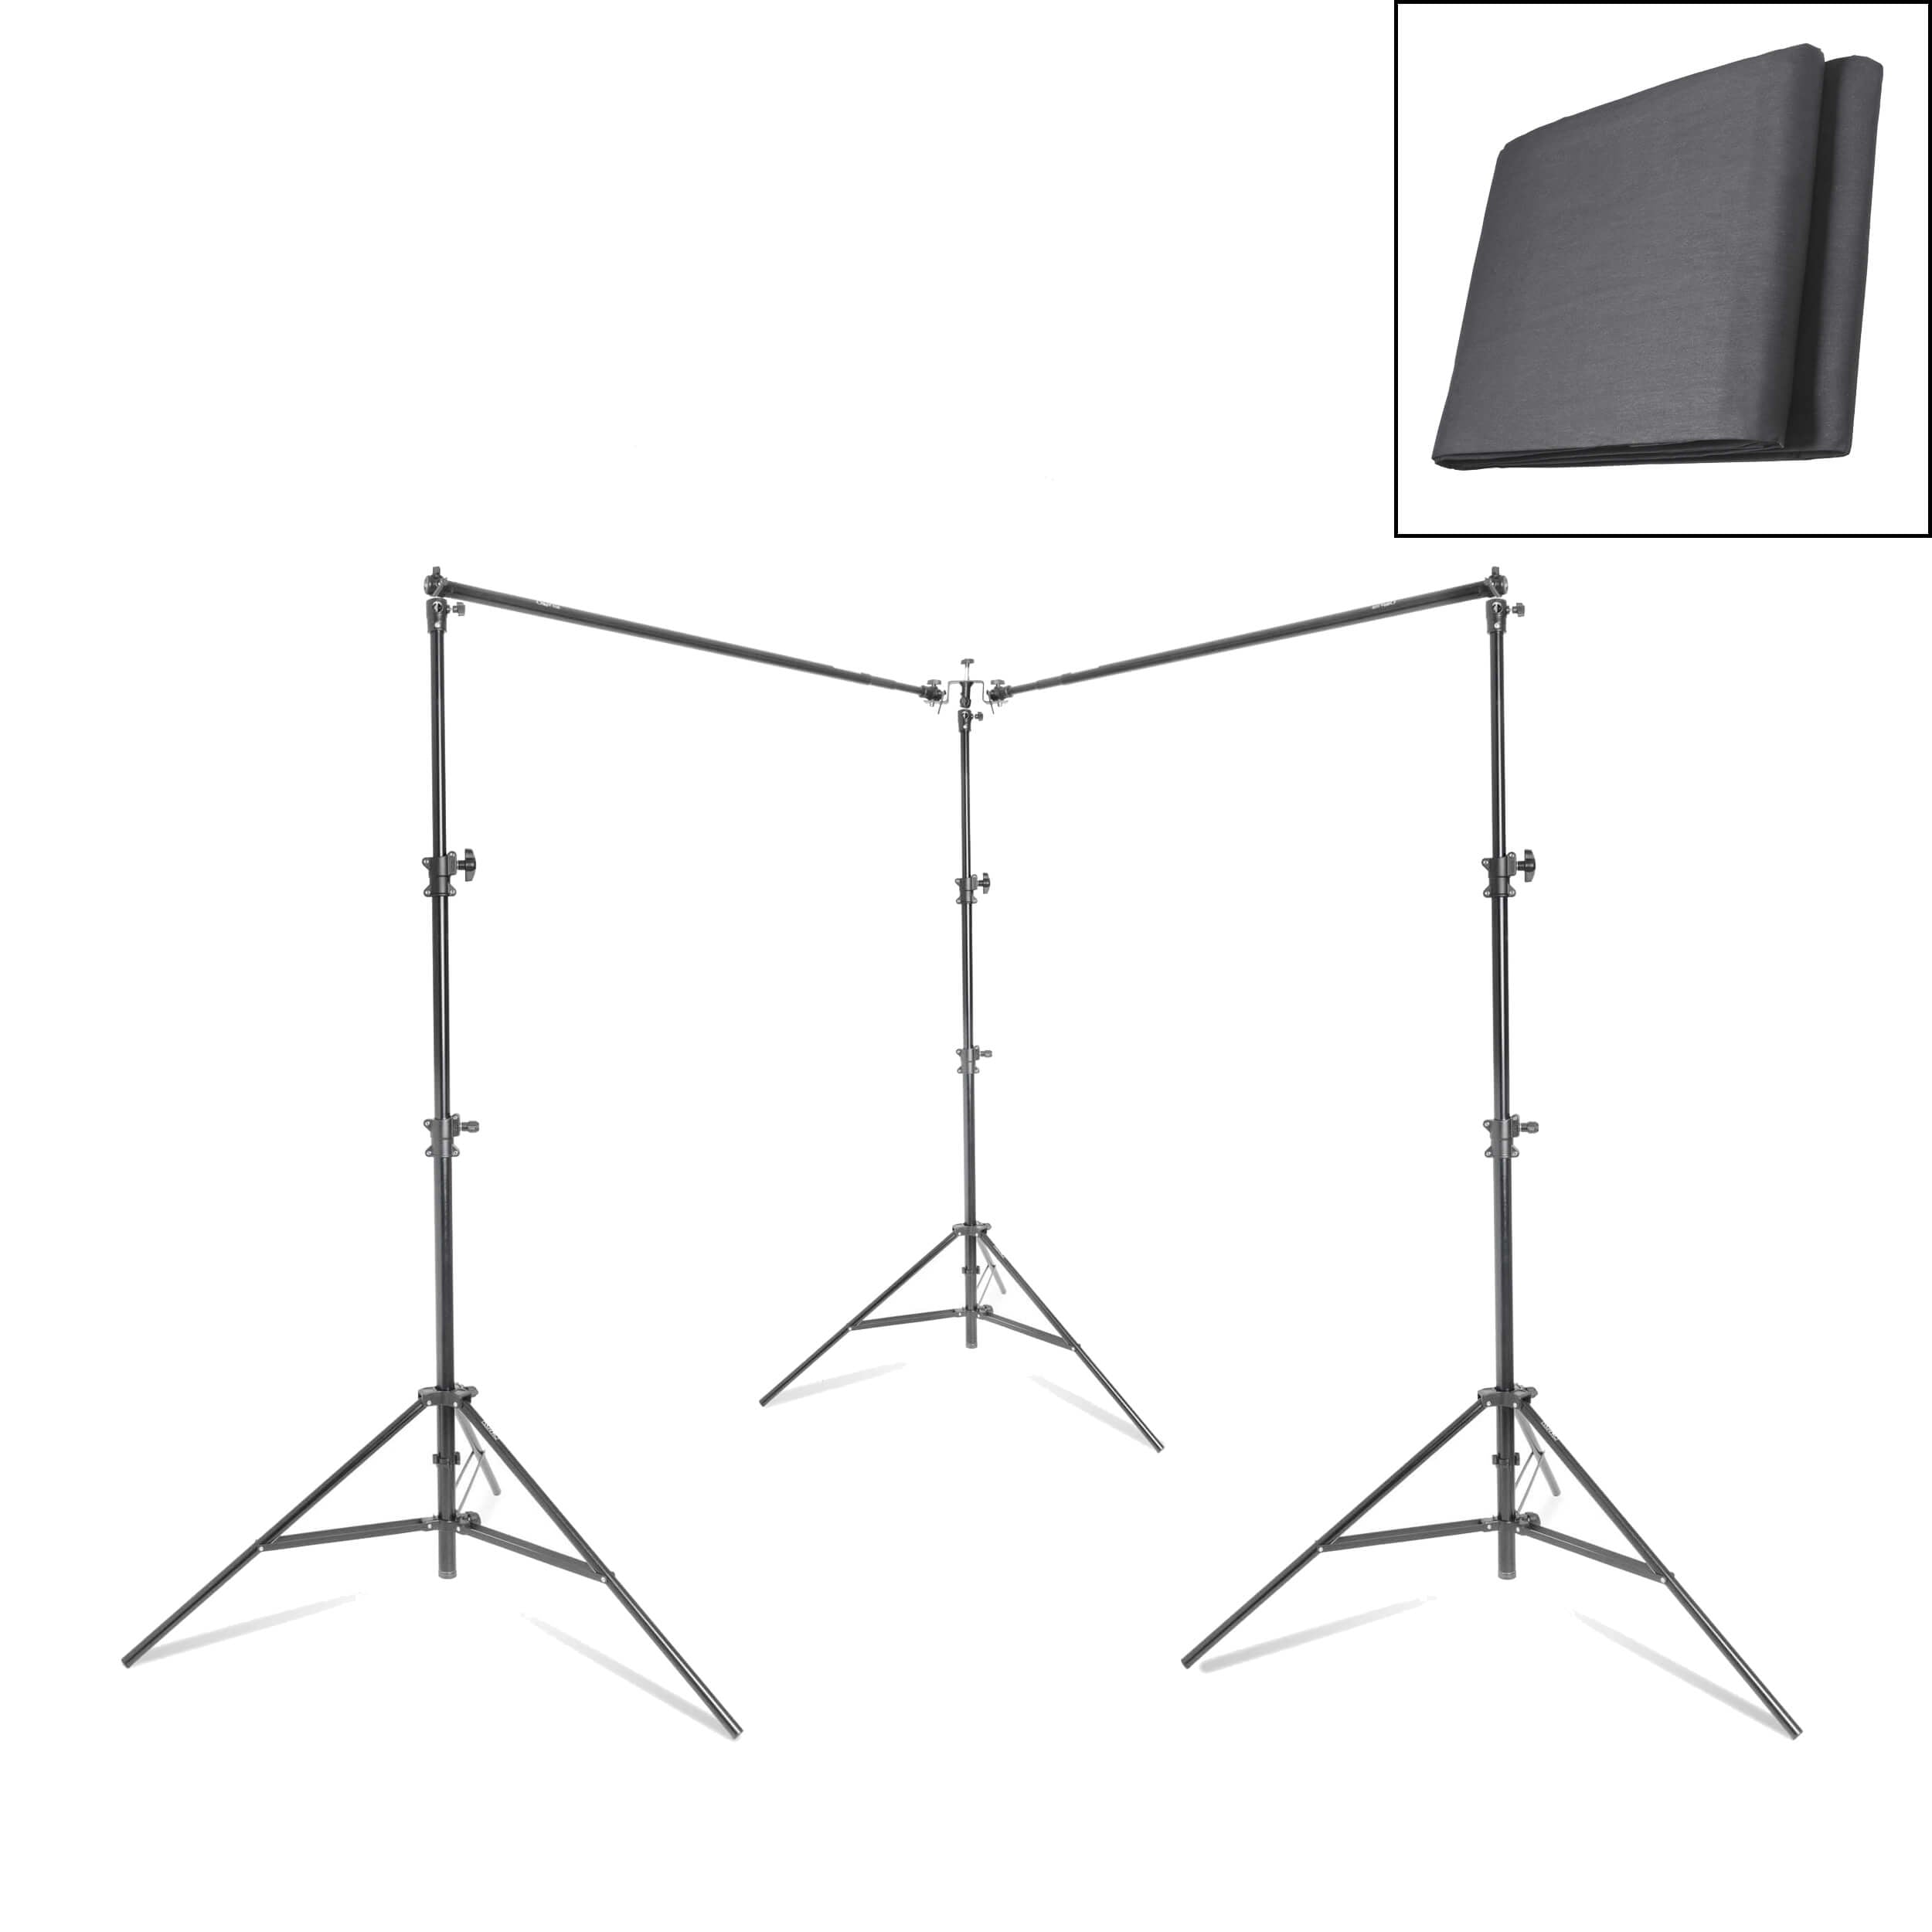 Double Telescopic Poratble Stand & 3x6m Grey Muslin Backdrops